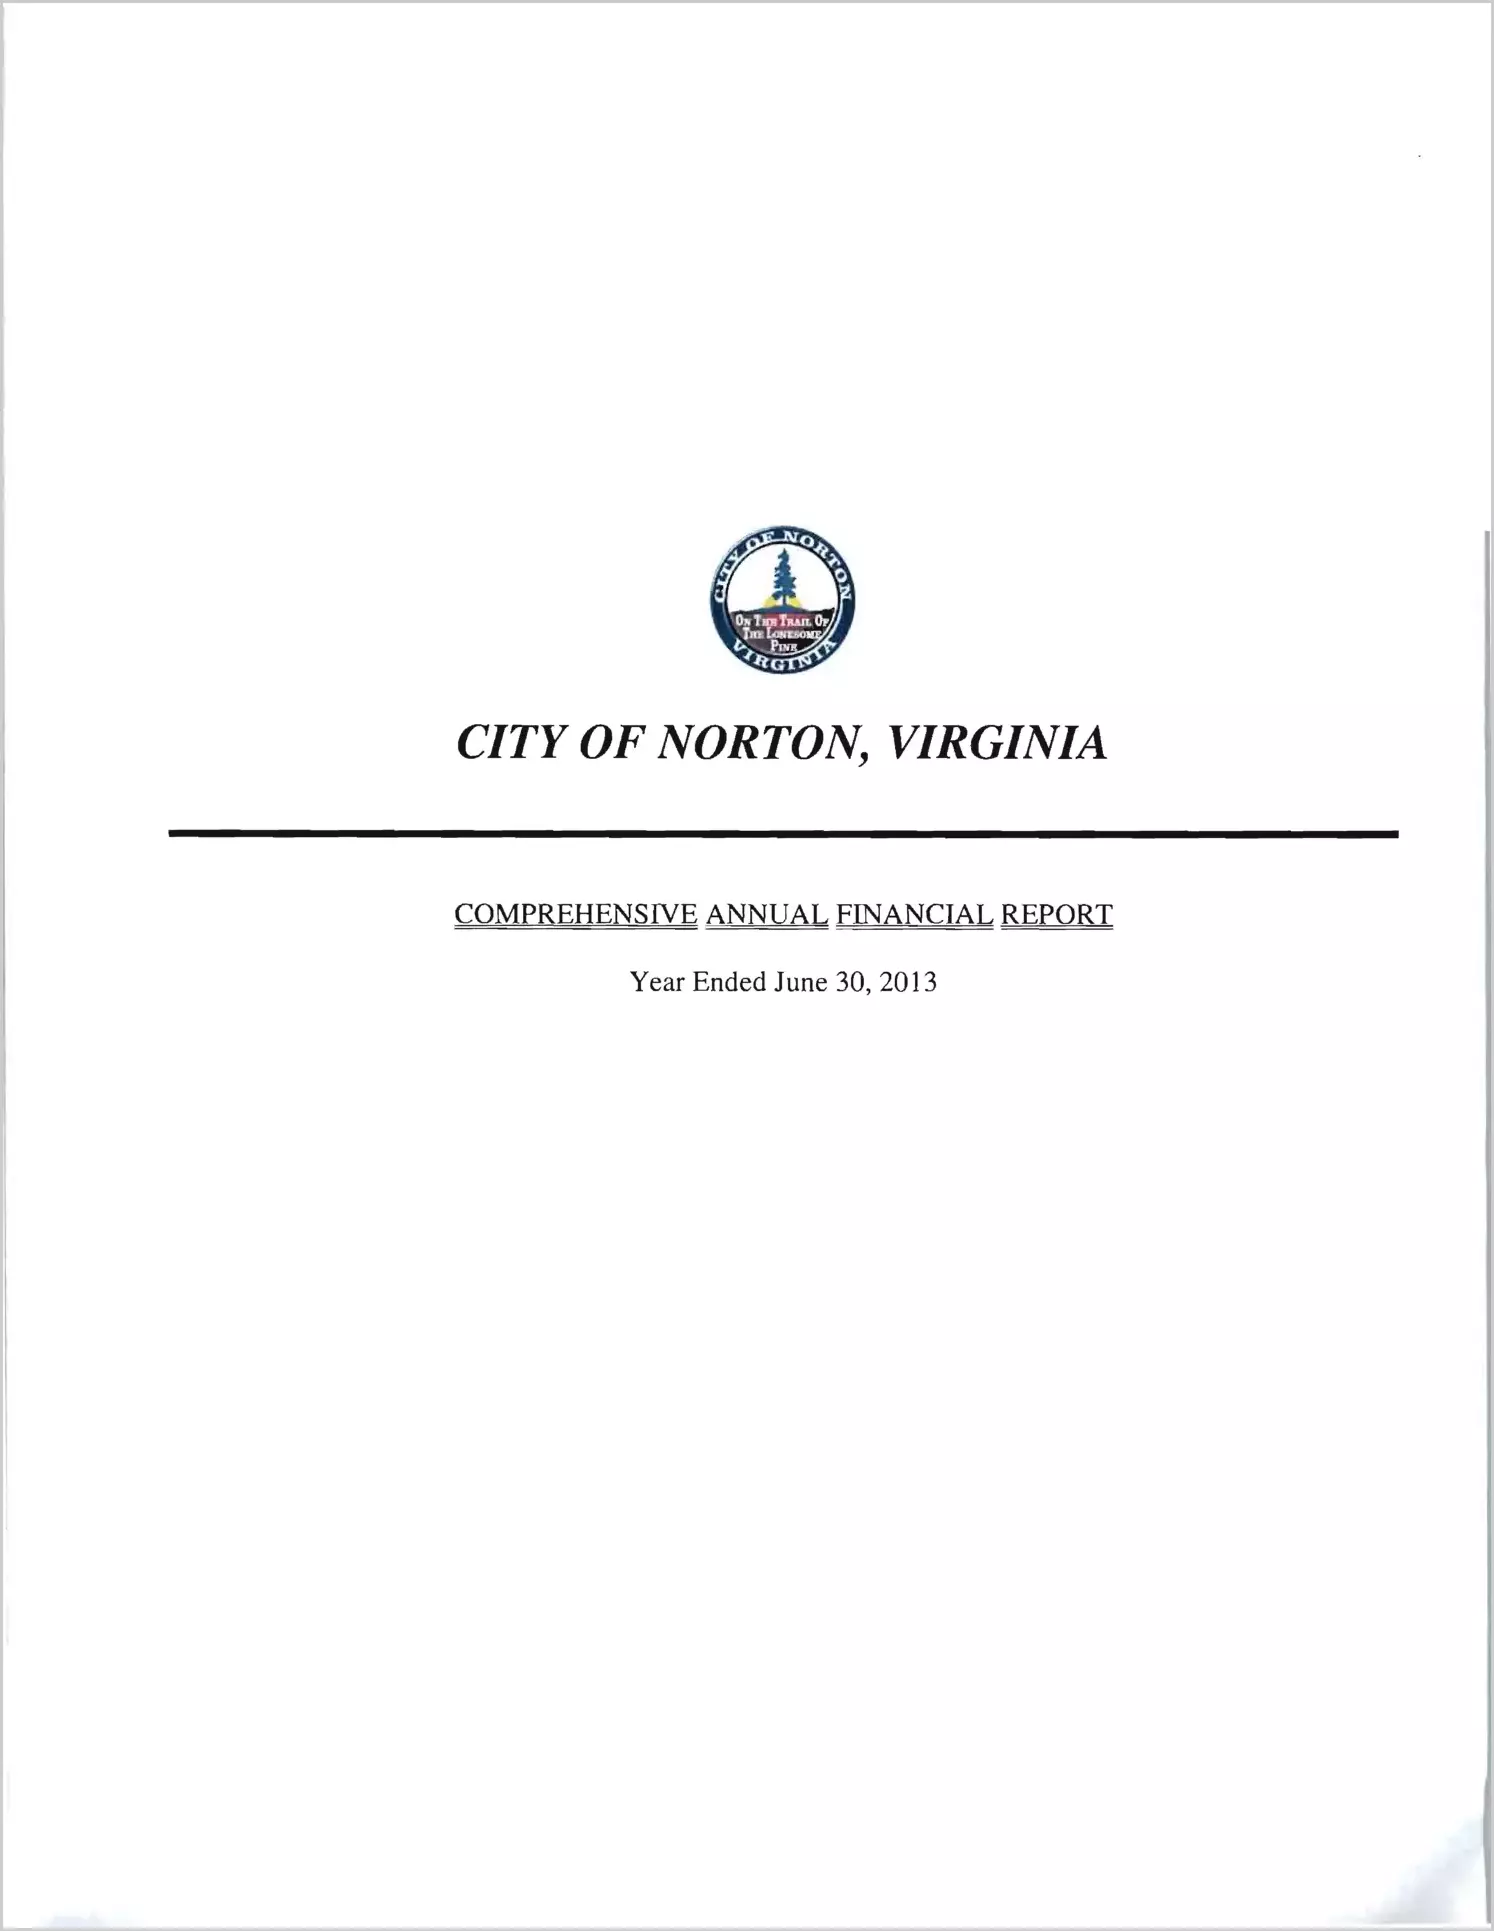 2013 Annual Financial Report for City of Norton